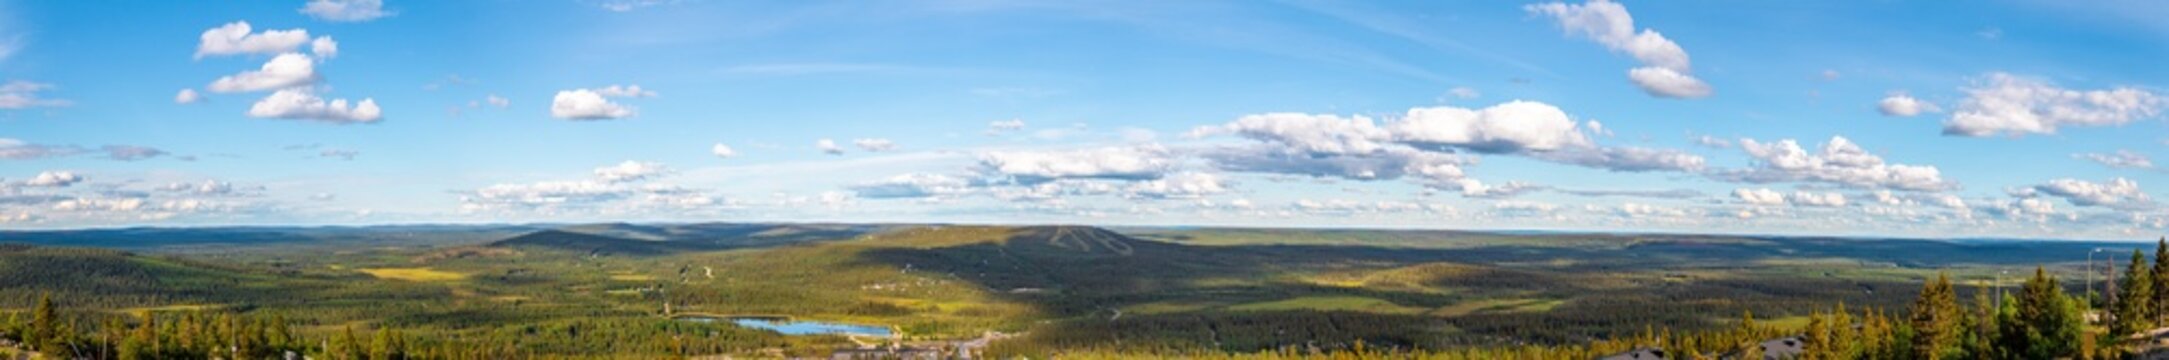 Landscape view from the top of Iso-Syöte hilltop with clouds and sky, Lapland, Finland © Henrik Lobbas